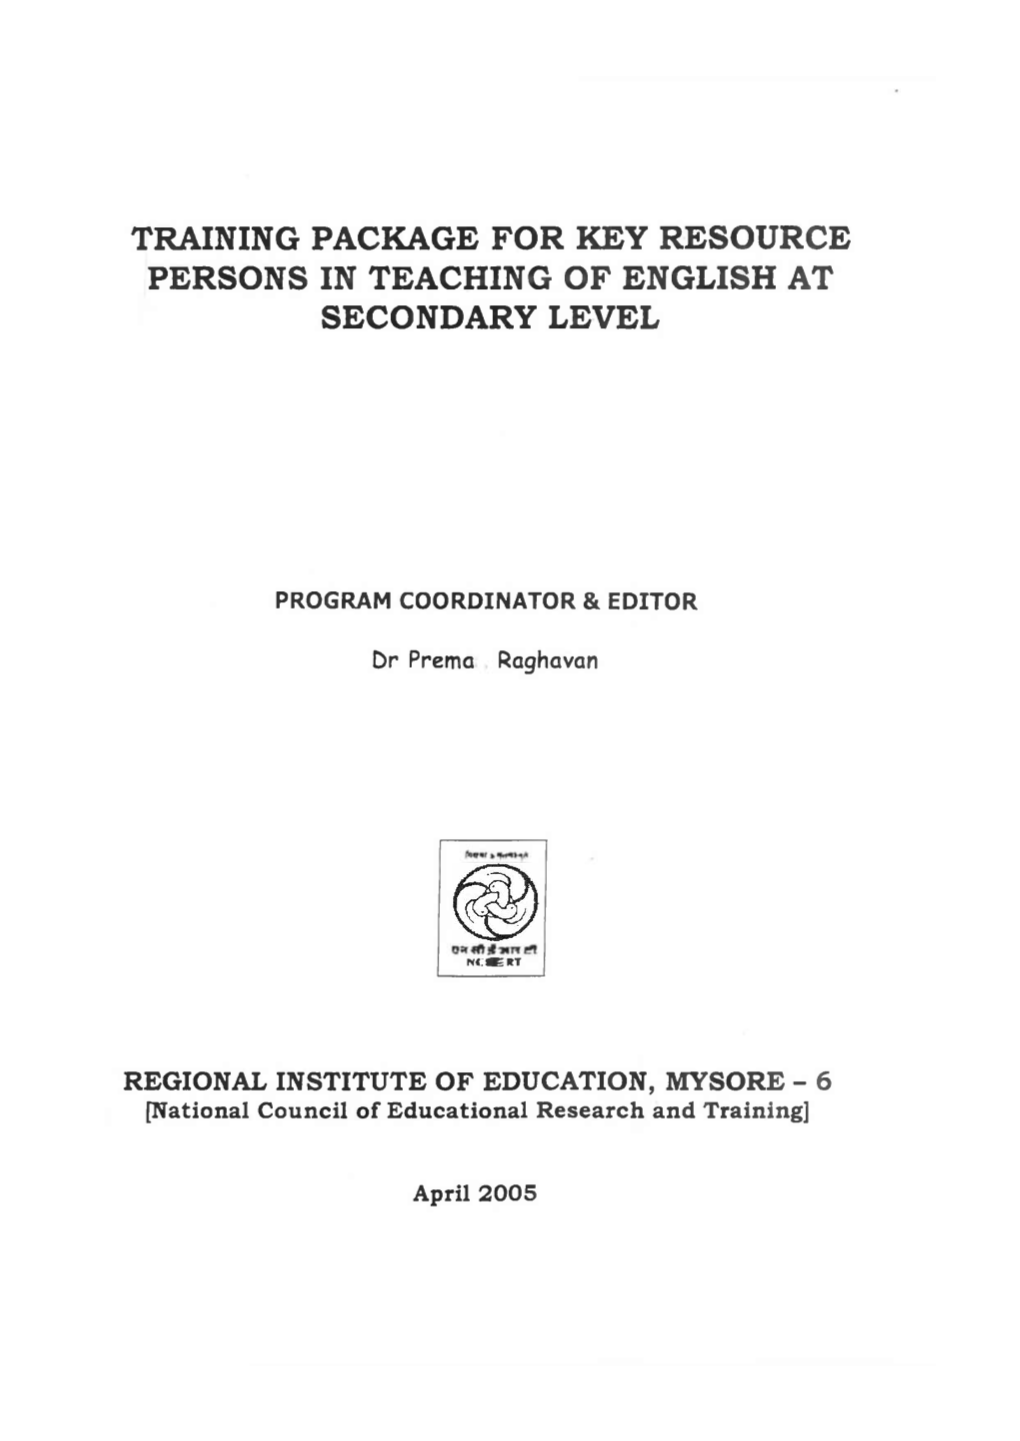 Training Package for Key Resource Persons in Teaching of English at Secondary Level